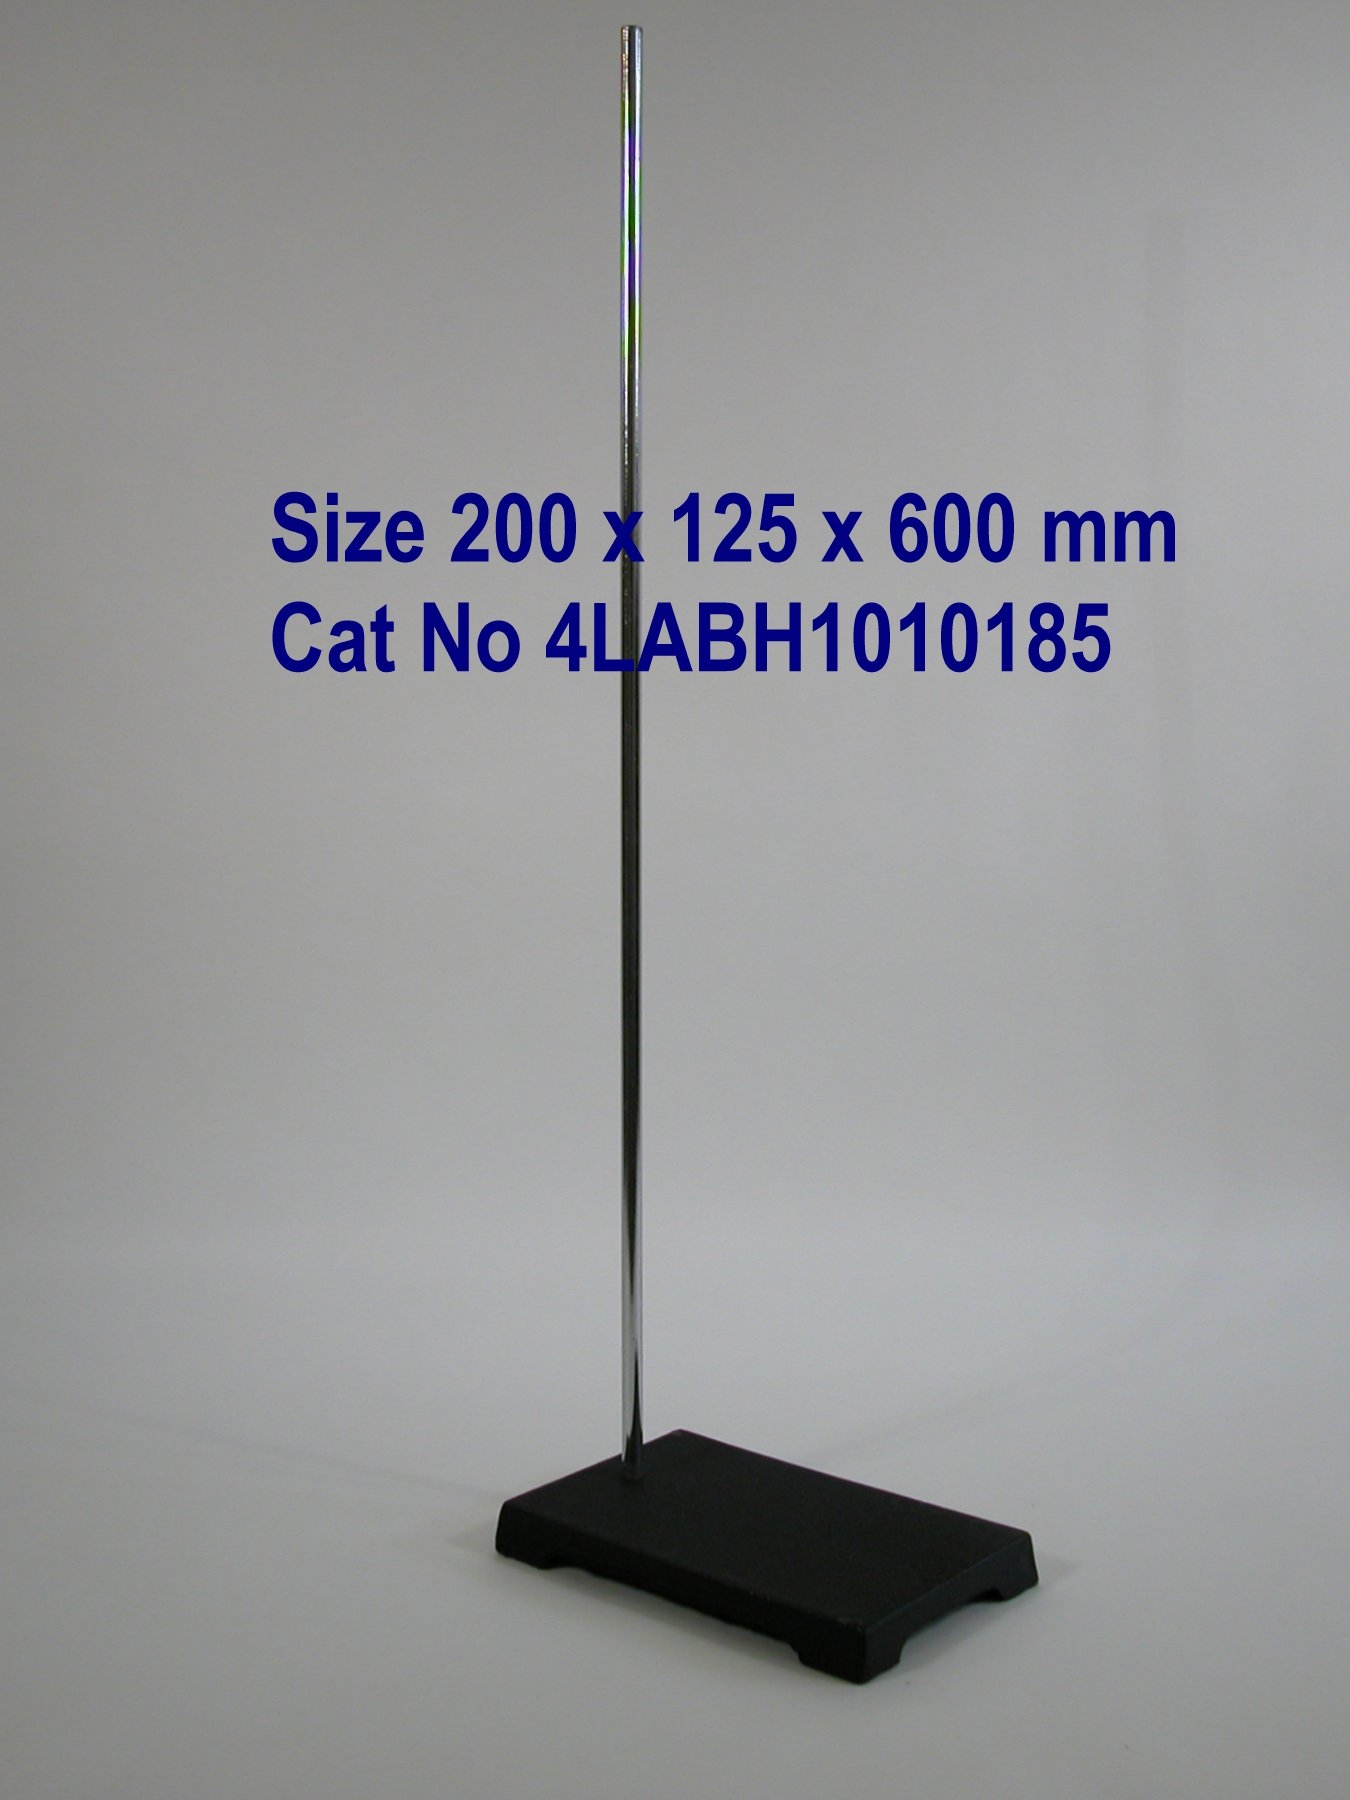 Retort stand base and rod